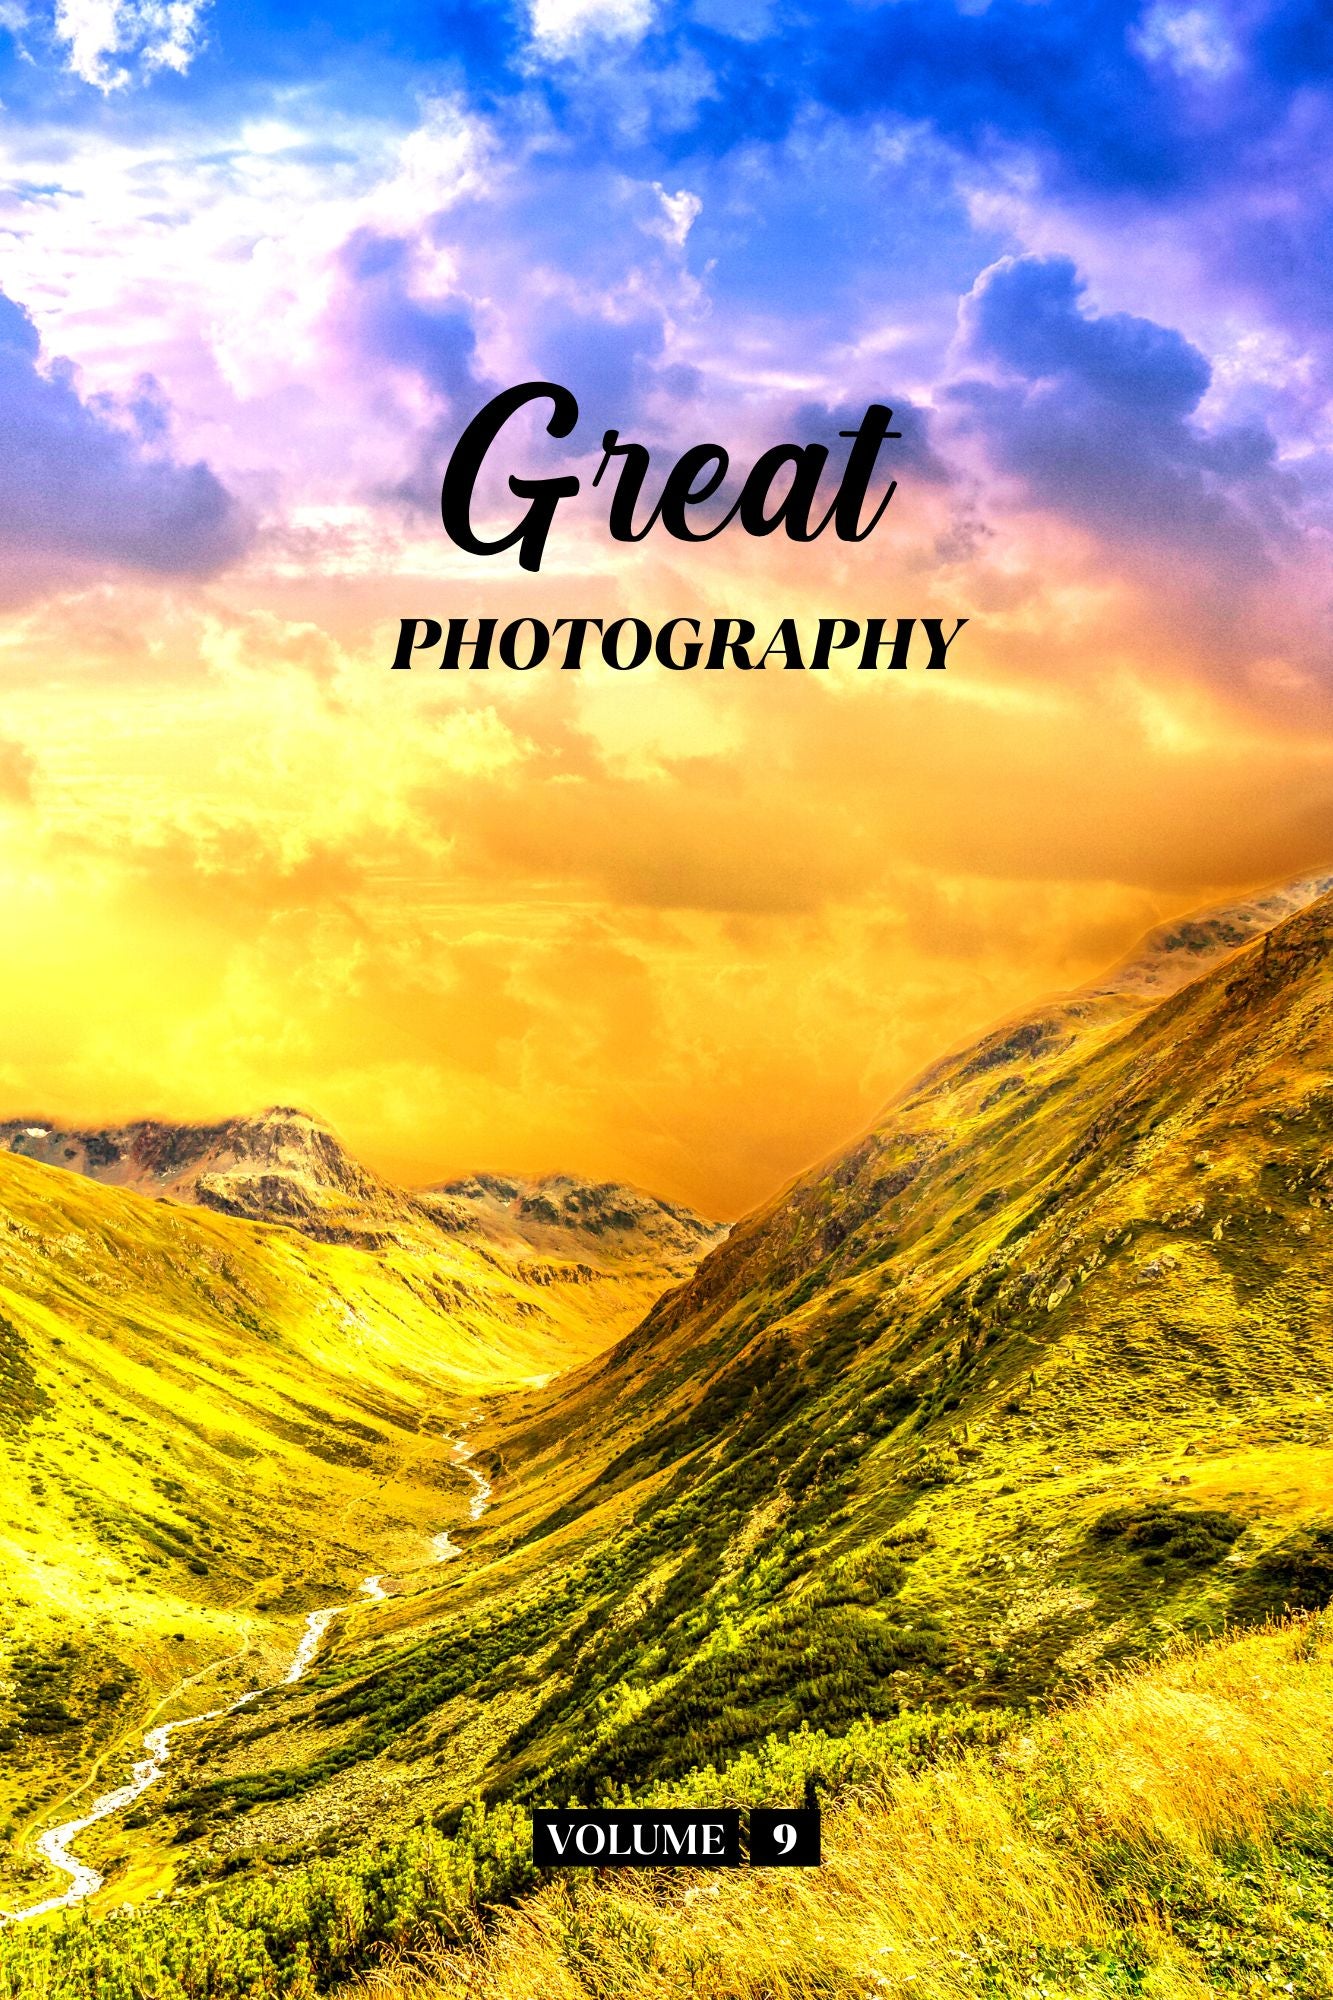 Great Photography Volume 9 (Physical Book)